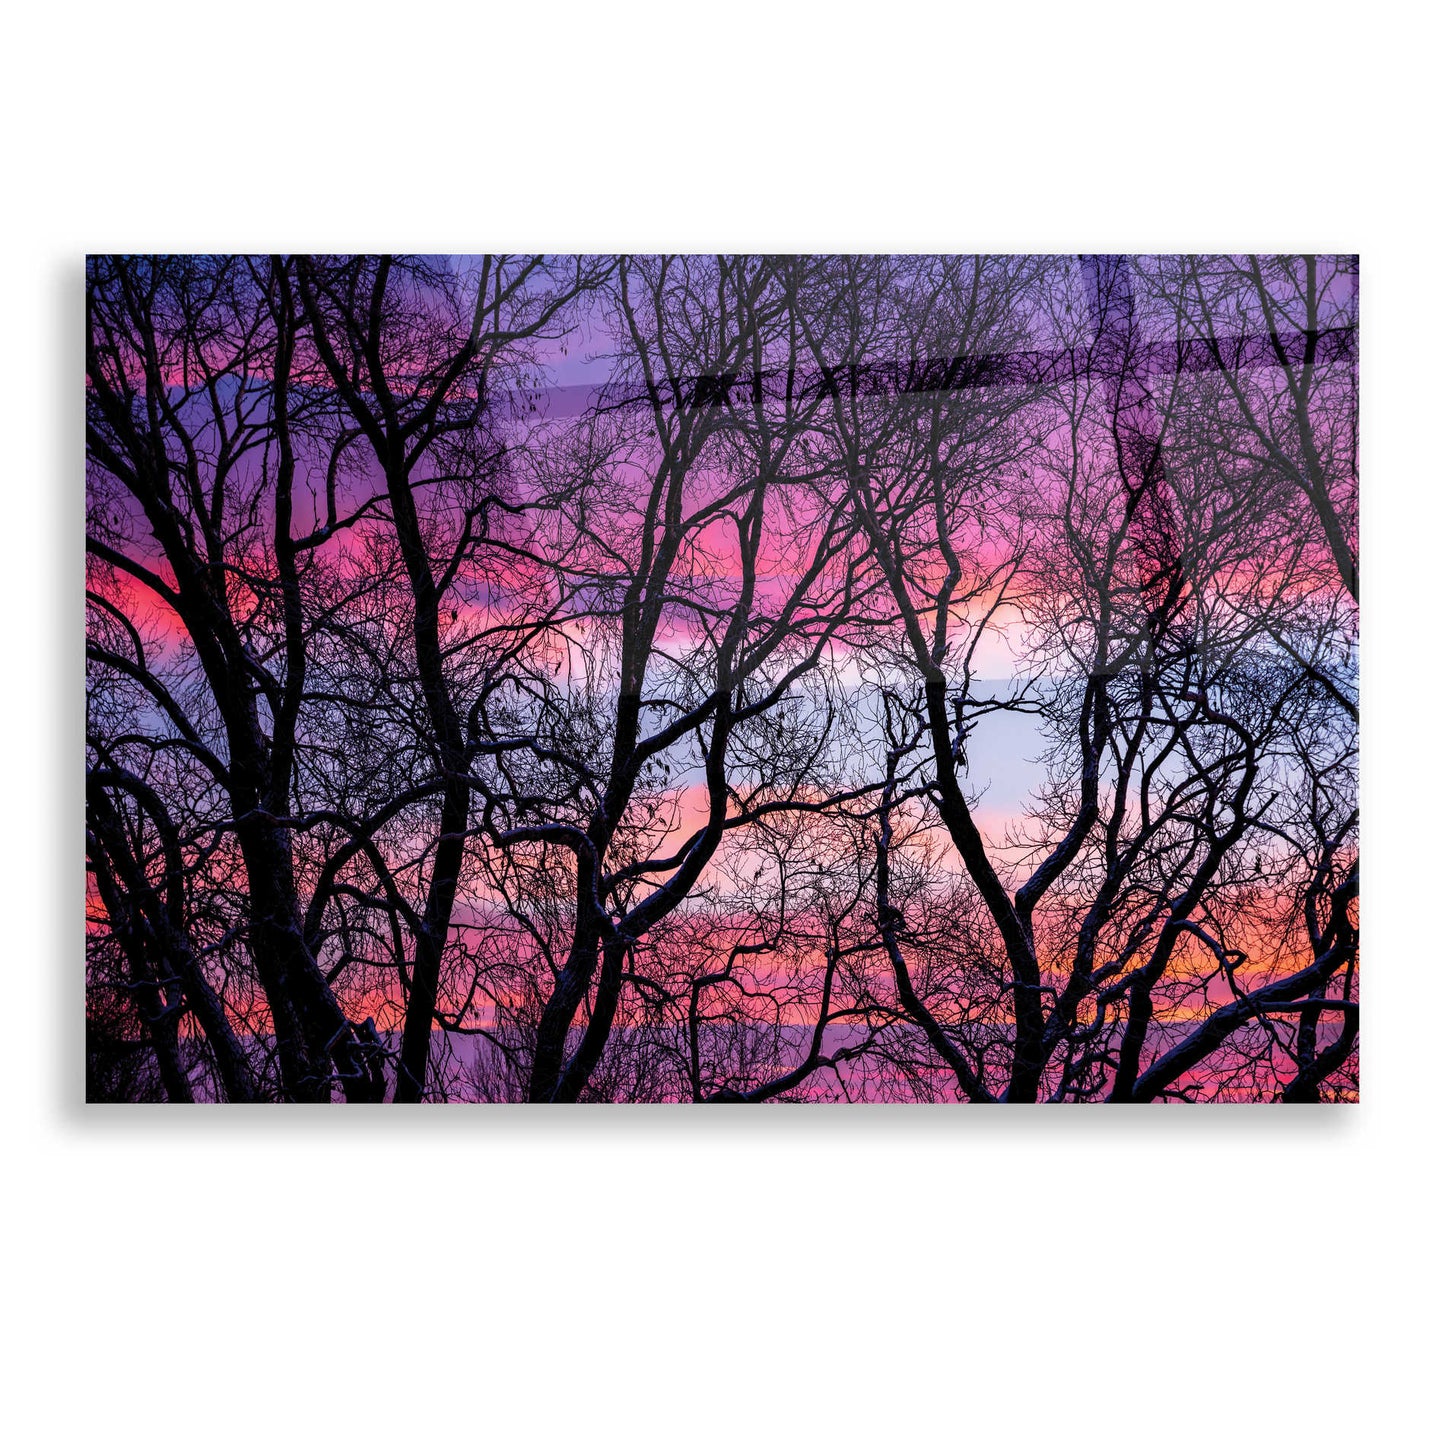 Epic Art 'Sunrise in the Trees' by Darren White, Acrylic Glass Wall Art,16x12